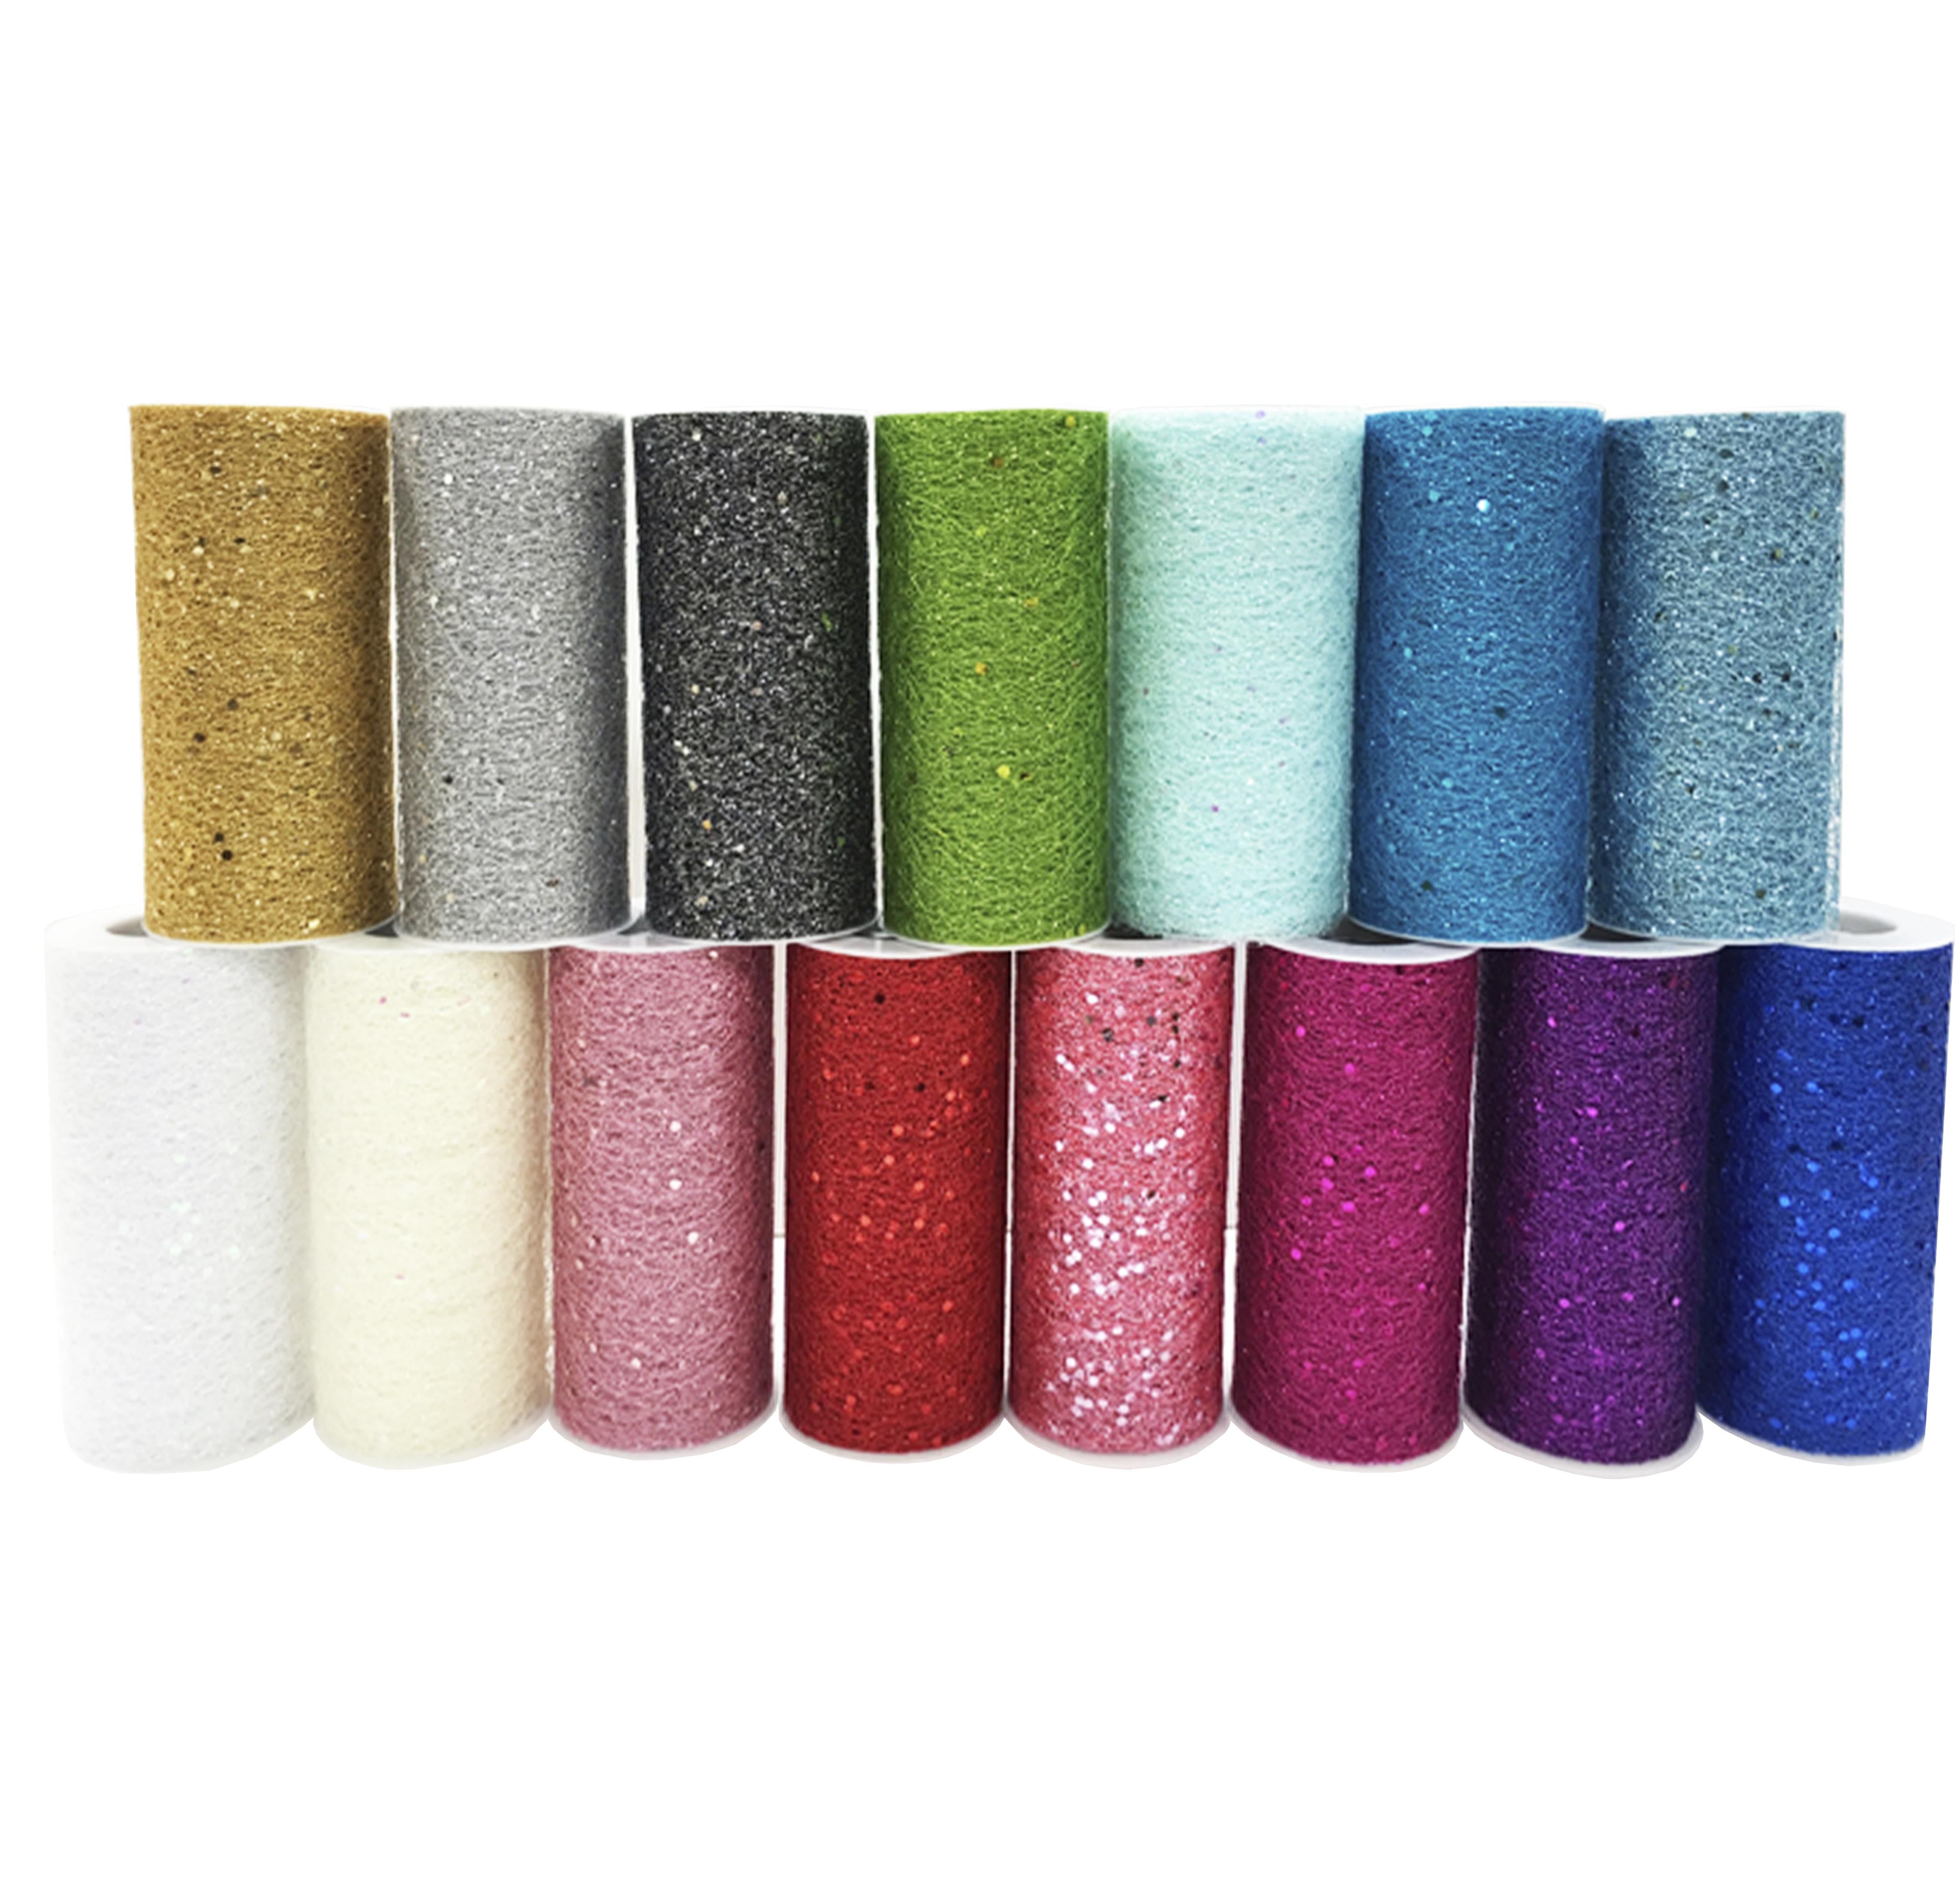 54 inch wide Glitter Tulle Fabric Bolt Roll 10 yards 